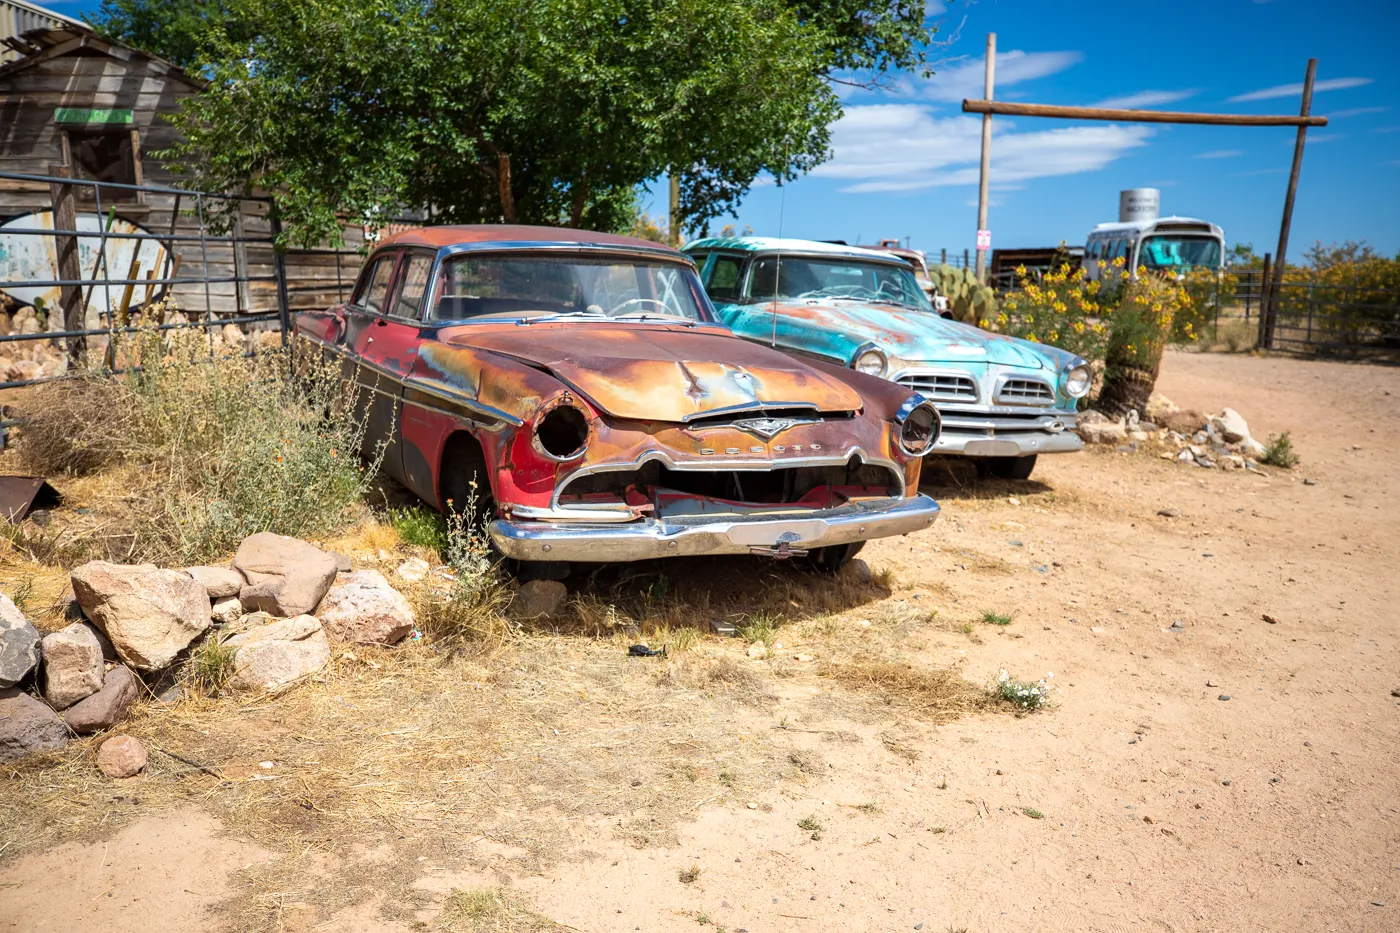 Vintage cars at Hackberry General Store in Kingman, Arizona Route 66 Roadside Attraction and Souvenir Shop